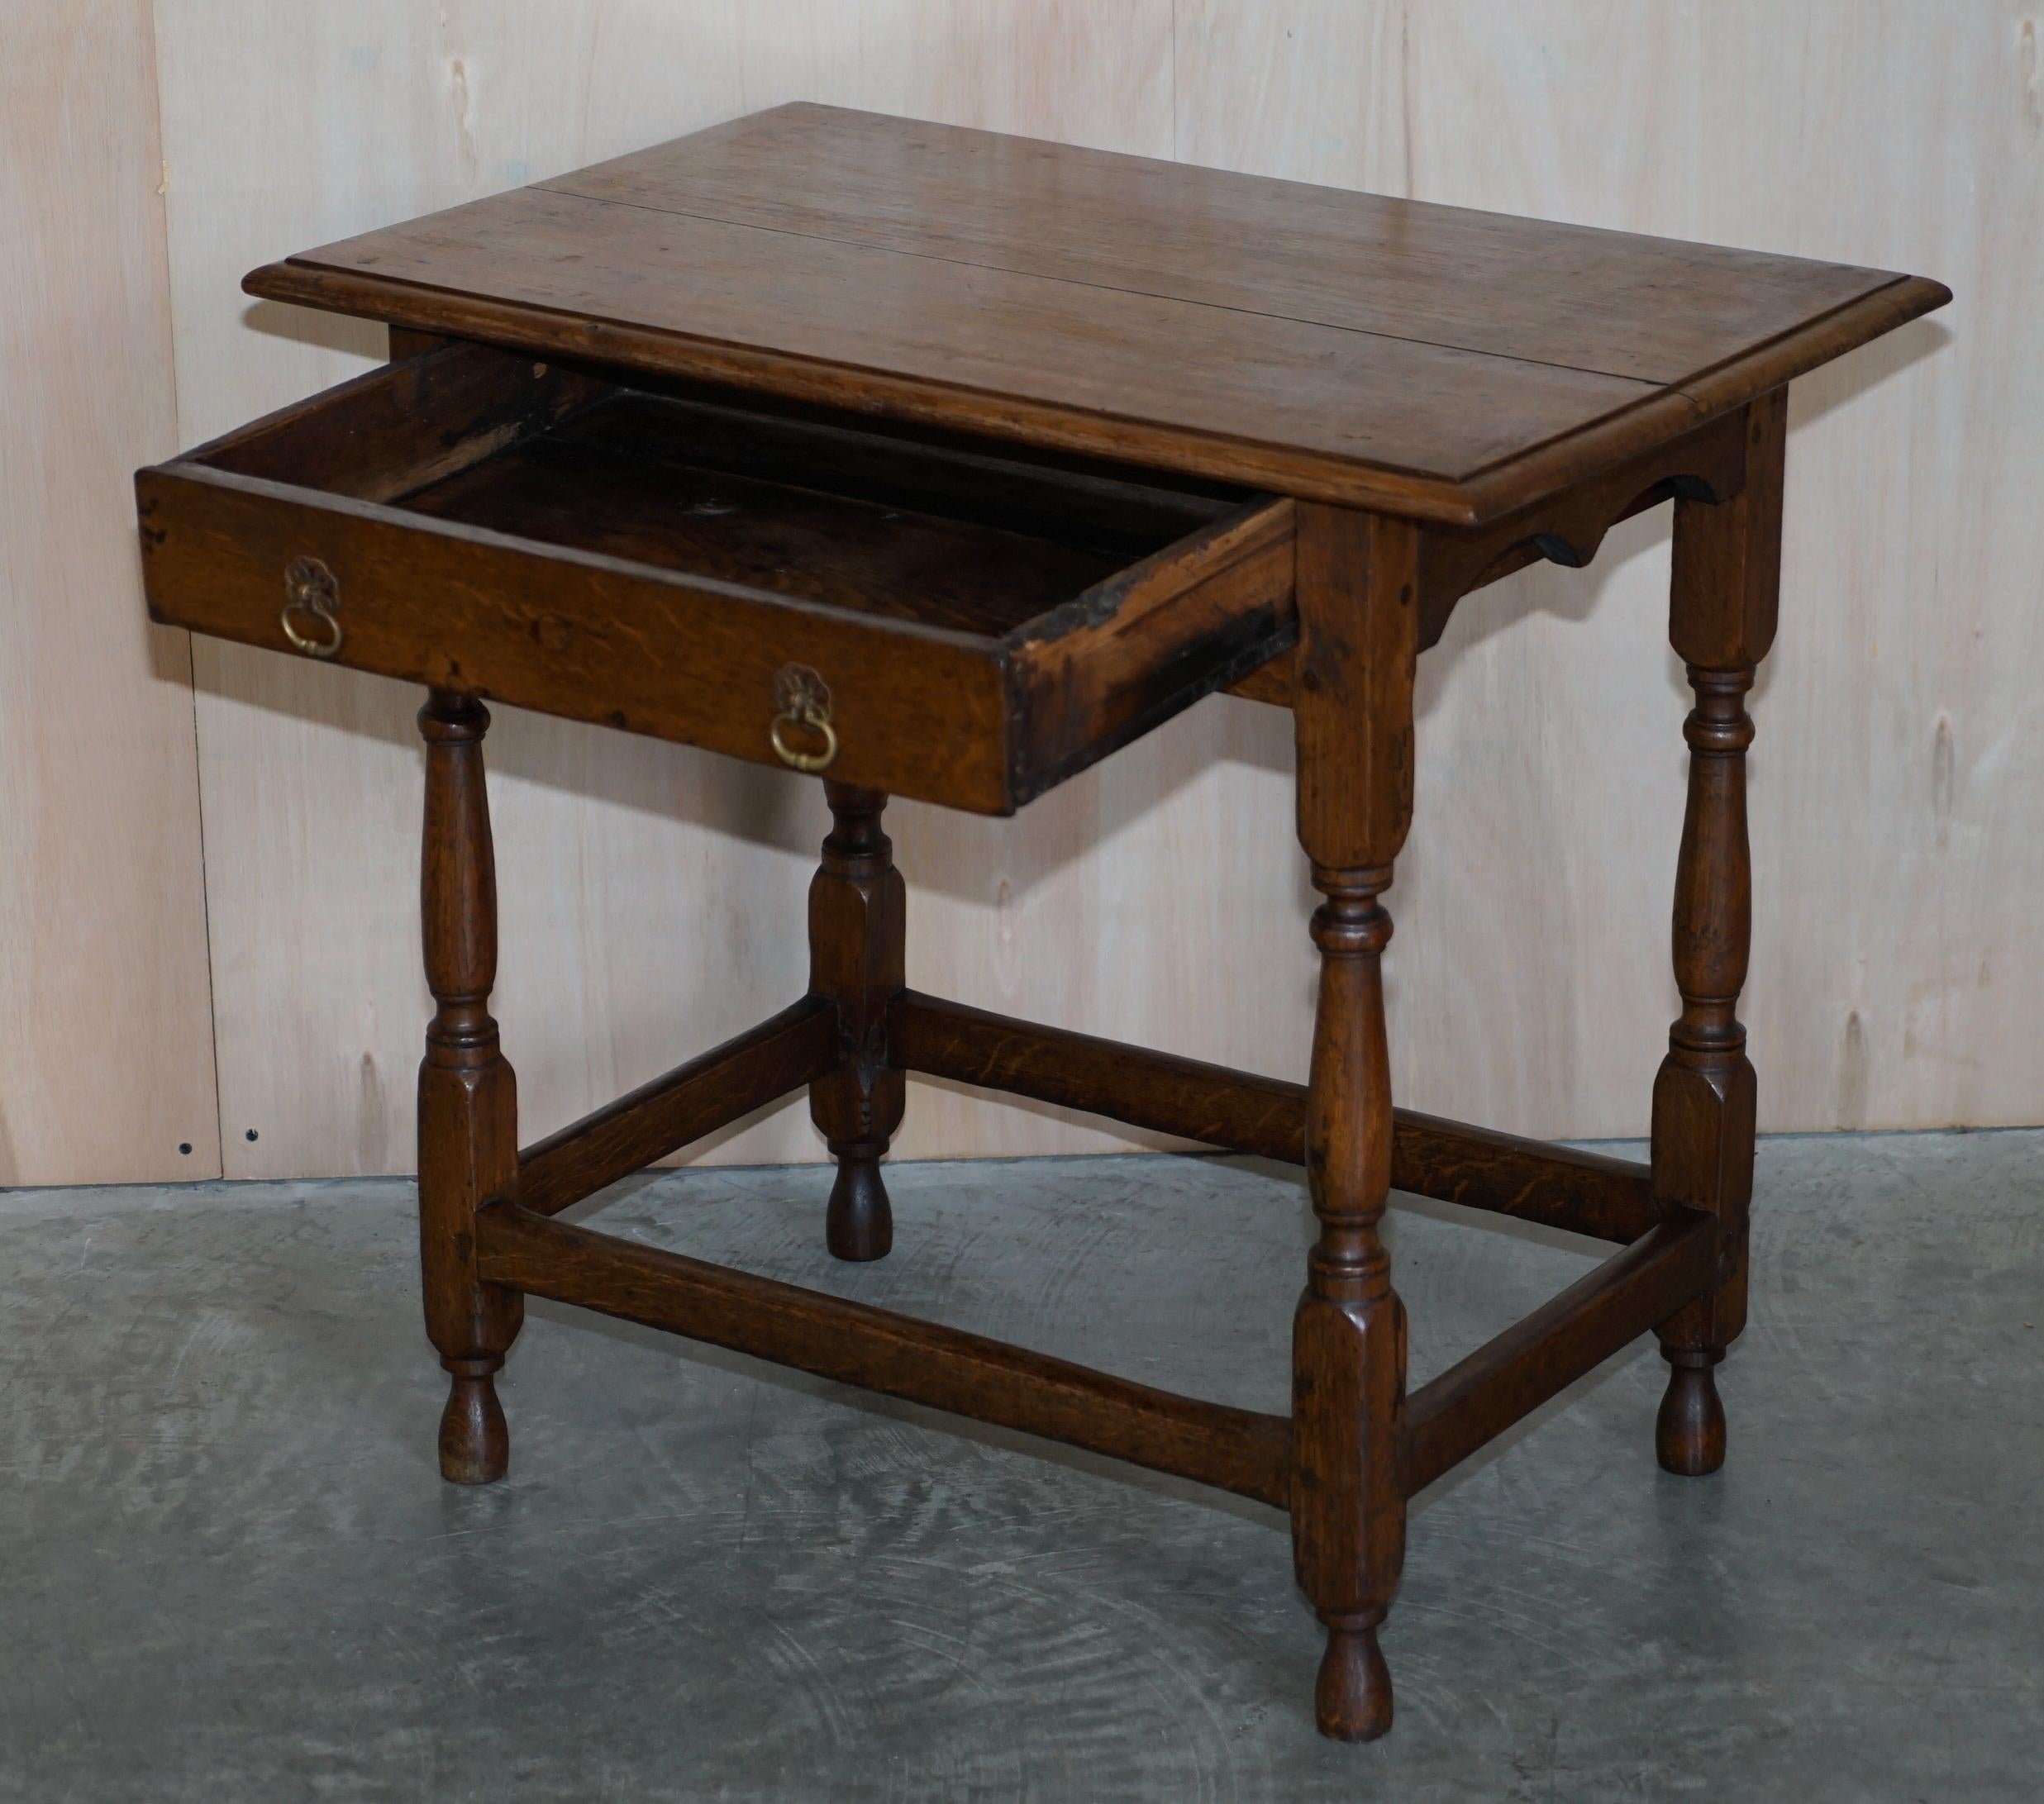 Antique circa 1700 English Oak Jointed Lowboy Side Table with Single Drawer For Sale 9